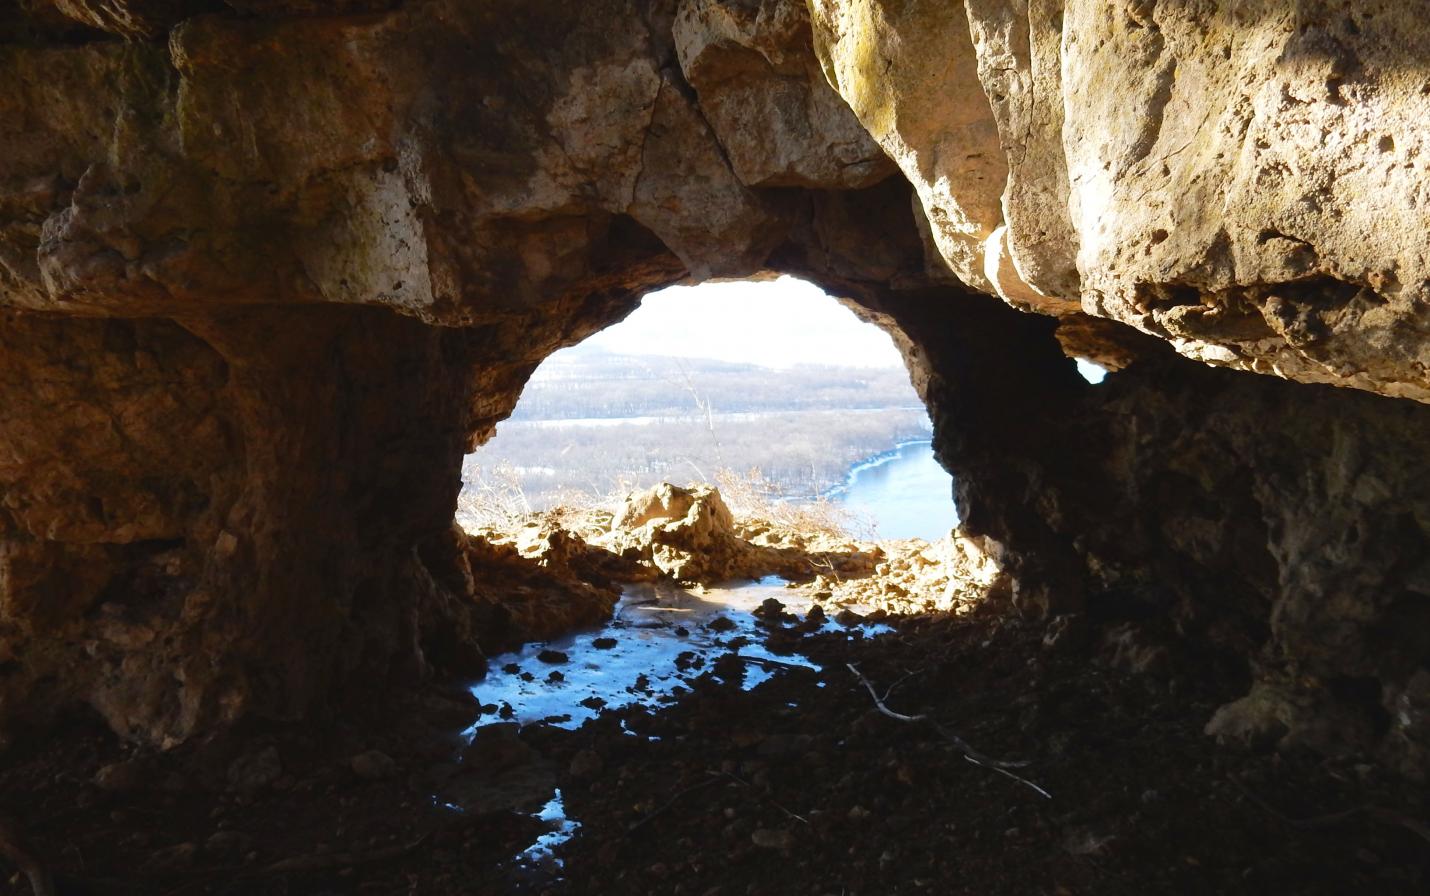 Lincoln's Cave